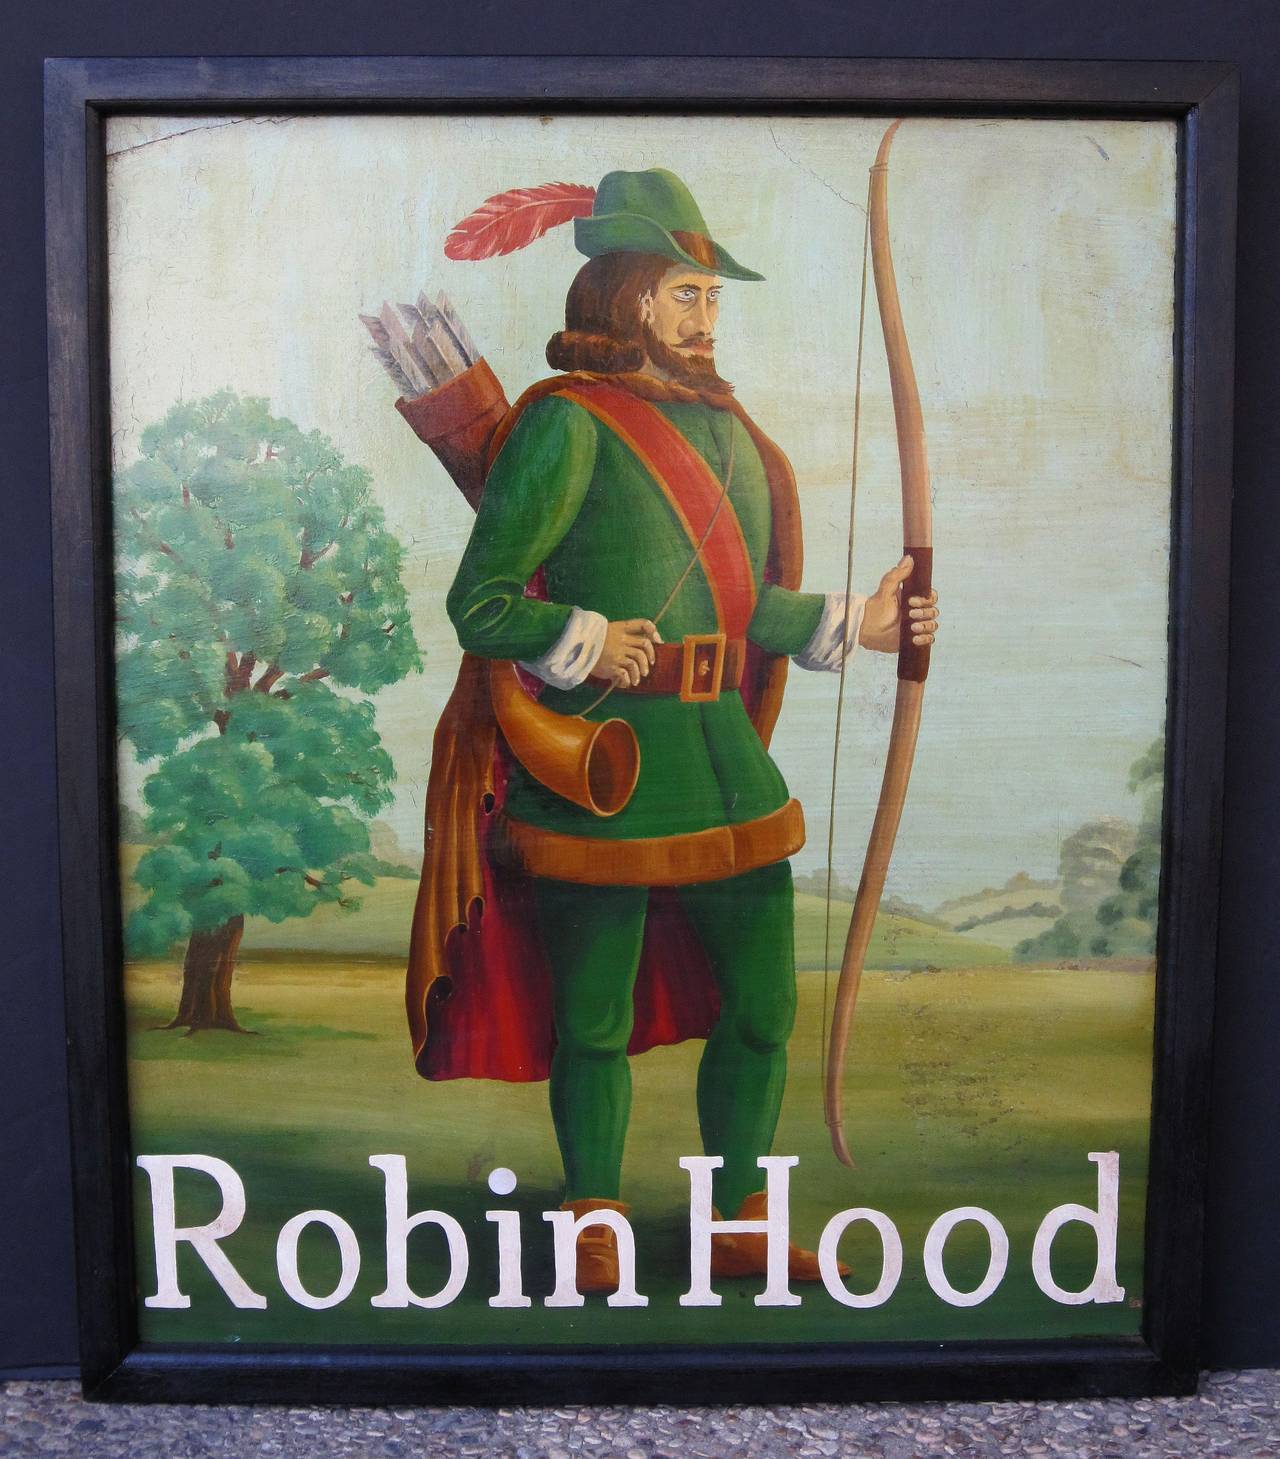 An authentic English pub sign (one-sided) featuring a painting of the legendary folk hero, Robin Hood, standing in a field with longbow in left hand, entitled: Robin Hood.

A very fine example of vintage advertising artwork, ready for display.